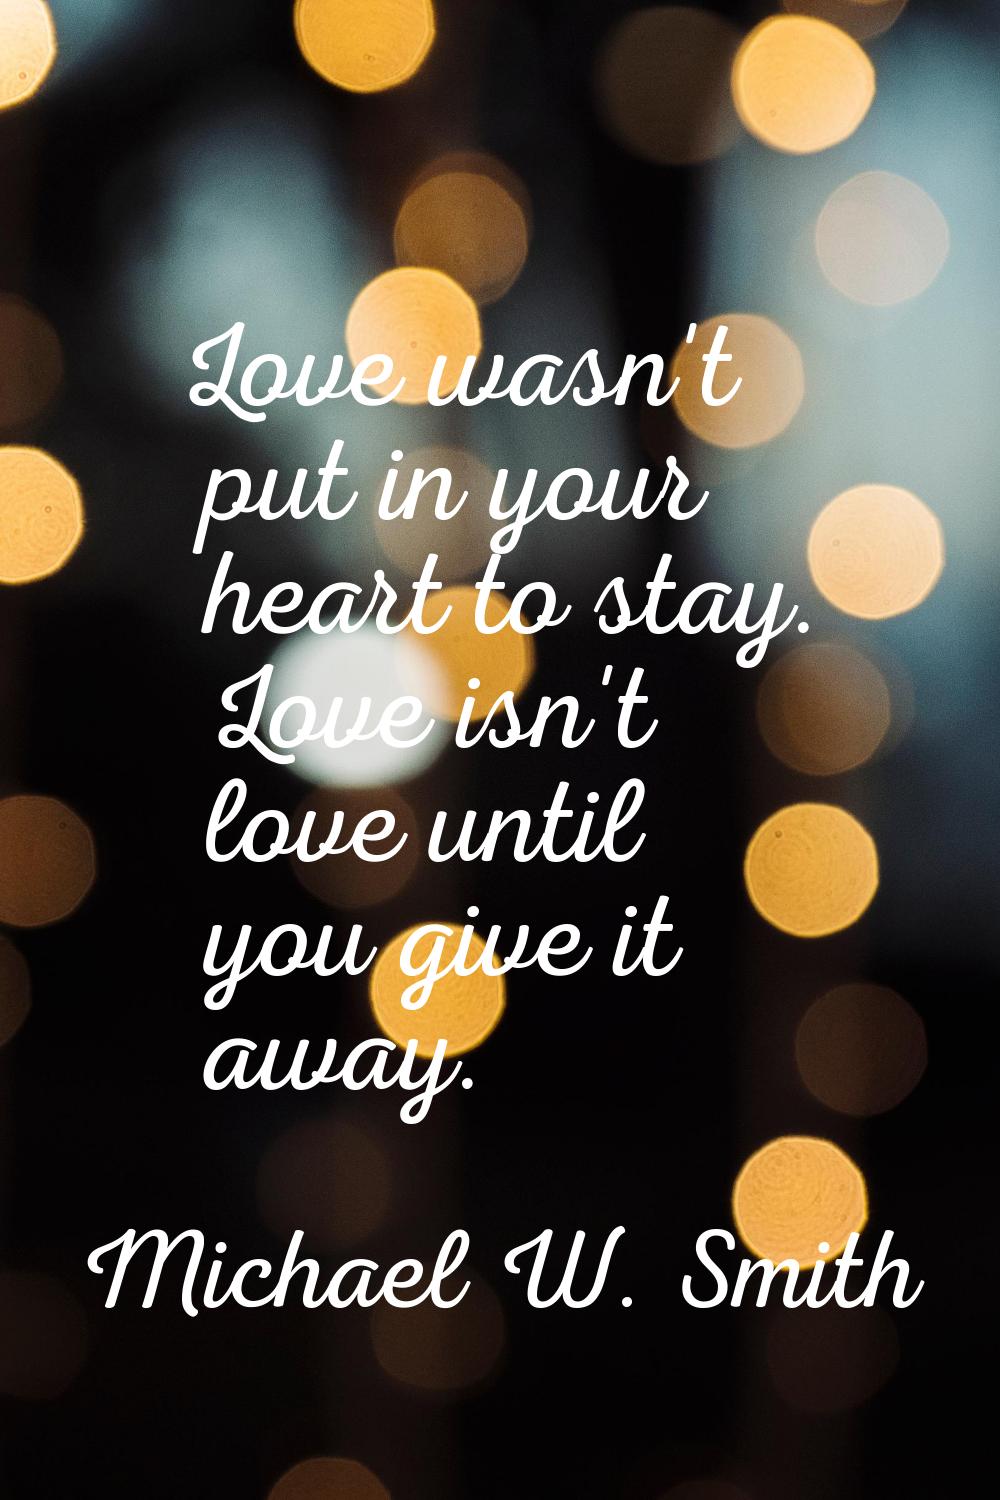 Love wasn't put in your heart to stay. Love isn't love until you give it away.